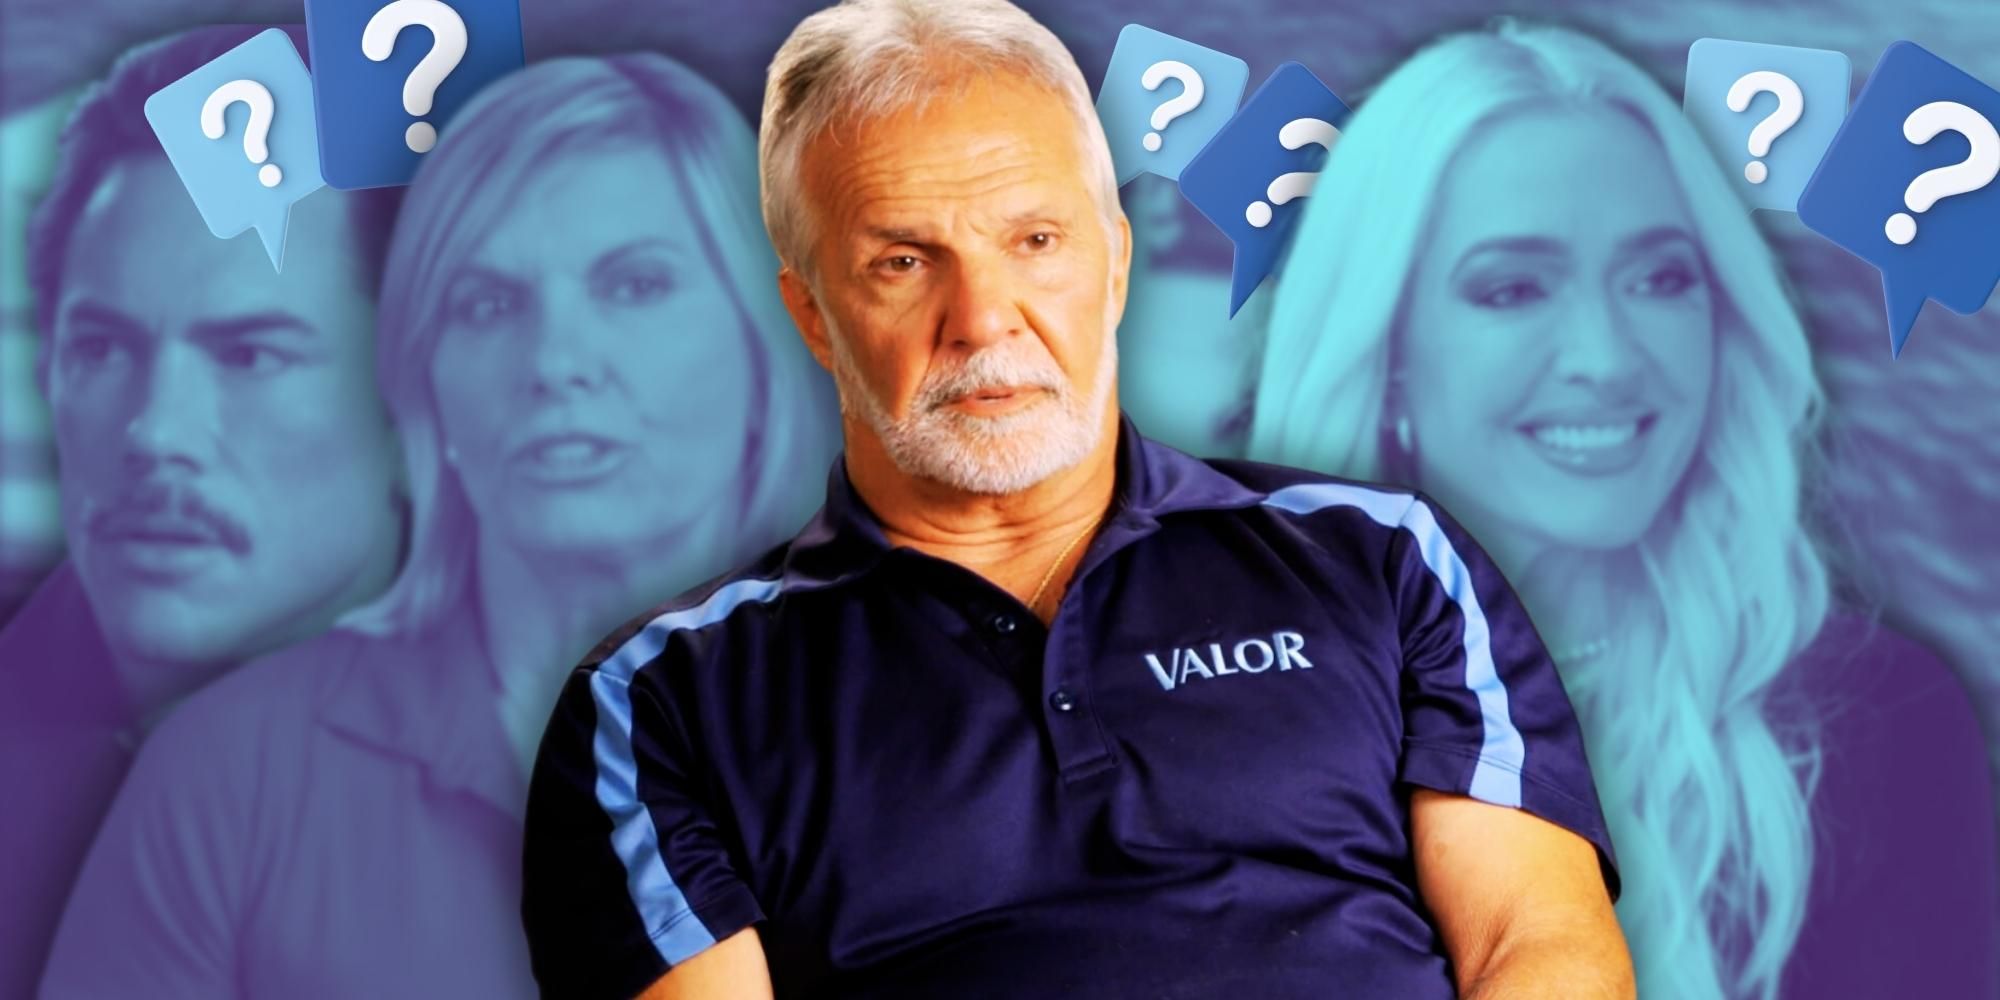 Below Deck's Captain Lee, flanked by Vanderpump Rules Tom Sandoval, Below Deck Med's Captain Sandy Yawn, and Real Housewives star Erika Jayne, with question marks above their heads